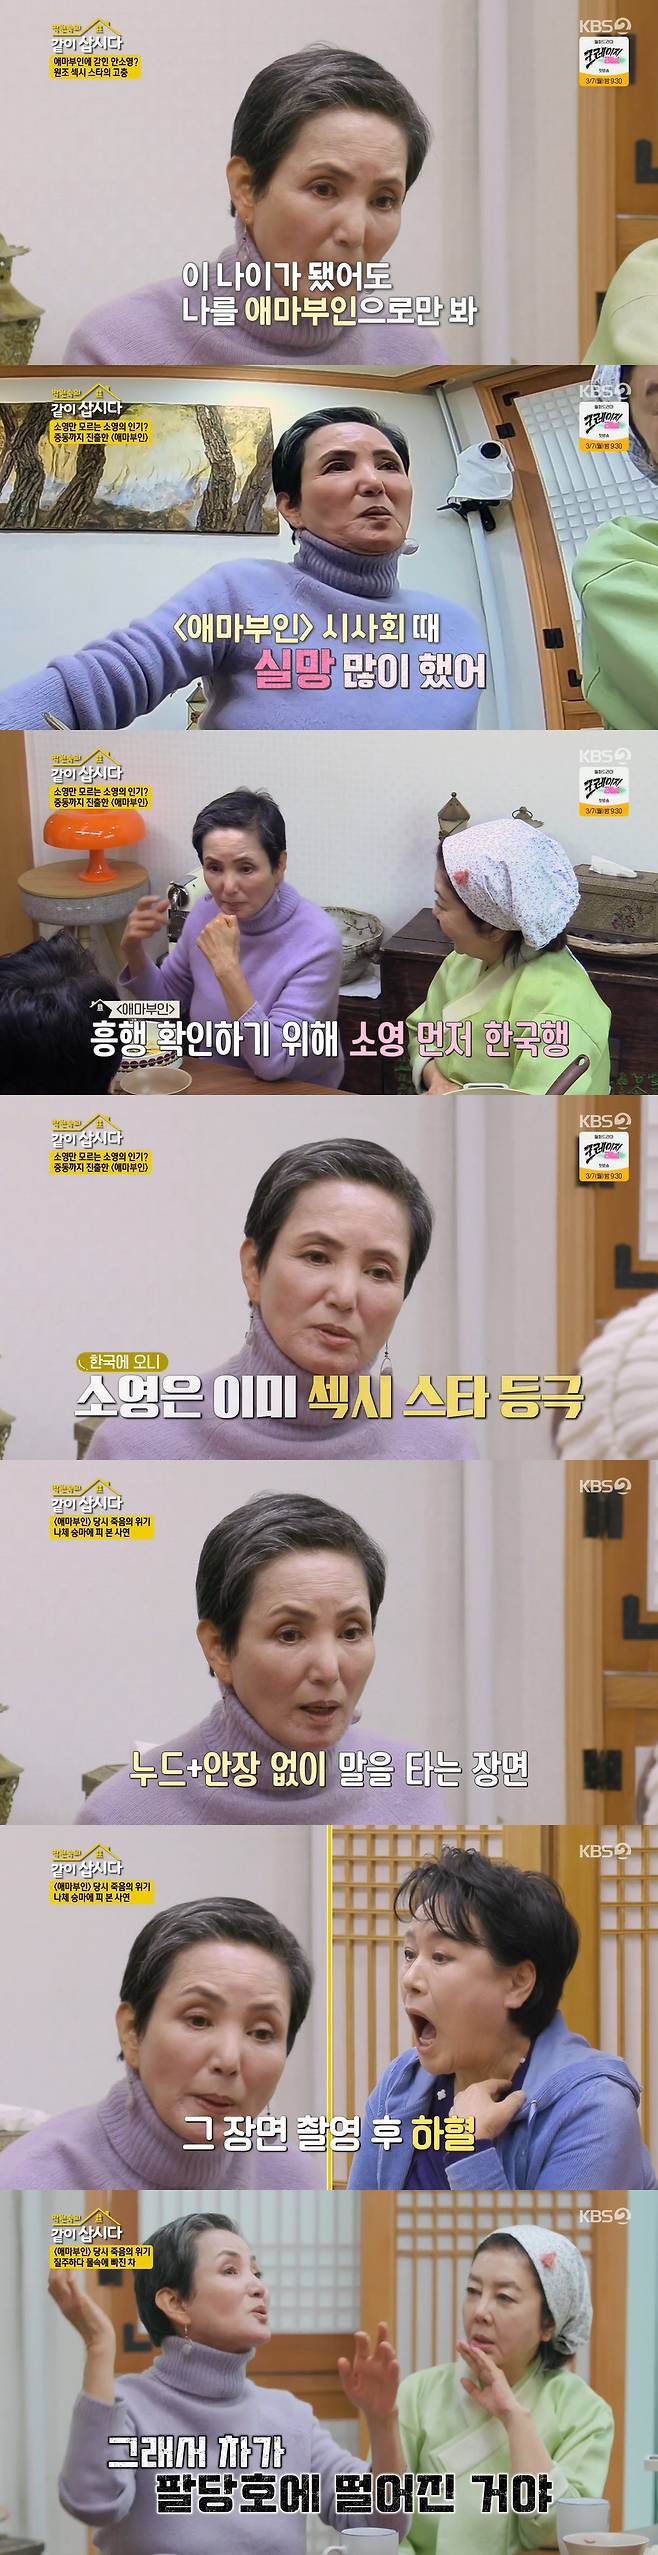 Actor Ahn So-young has honestly revealed his fathers Identity from the behind-the-scenes story of My Lady.Ahn So-young, who met a sage in KBS 2TV Park Won-sooks Season 3 broadcast on the 23rd, told a true life story.Park Won-sook was surprised by the appearance of Ahn So-young, who was different from the usual image. So, Ahn So-young said, I think the image is wrong since I was a child.People look at me like Im a bitch. Ive been in school before Madame.After the filming of The Wife, the sexy image hardened and did not even get a chance to perform another act. The directors declared to me that they can not touch me after Mrs.Even if people are now this age, they only see me as a wife. I do not see Actor Ahn So Young.He added, I look at it as a glamor, but in fact, glamor is Park Won-sook.Ahn So-young then released the behind-the-scenes story of The Wife of the Wife. Ahn So-young, who was nominated by the directors wife, who was a senior member of the theater, said, In fact, there is an original film.At that time, the movie Mrs. Emmanuel was famous, and the director explained that the movie was like Mrs. Emmanuel of the Korean version with the motif.I was actually disappointed at the premiere, I did not think this movie would succeed, so I went abroad when I opened the movie.But people from abroad recognized me, he said.Ahn So-young, who said that the article about wife was even in the Middle East newspaper, said, I arrived in Korea and the bishop could not even say it. The bishop made me a sexy actor.Thats why I became a sexy actor, he said.On this day, Ahn So Young took a picture of Mrs.When Actor saw the scenario and worked on it, there was a scene in Conti that was not in the scenario when he went to the scene.All the shootings communicated with the assistant director, and I stayed with the director until the end of the movie. I was surprised to find that I almost died three times while filming Mrs. Ama. Ahn So-young said, I ride the horse with all nude and ride without saddle.I took a lot of blood after I took it, so I said, If I can not have a child, I will be responsible. Also, while shooting a rain scene on a cold day, the water was frozen and fell, causing a wound to the body, and the whole body was frozen and fainted.In addition, Ahn So-young confessed that the car had fallen into the water during the filming.Ahn So-young, who was a novice driver at the time, said that the unpaved road was driven by the directors instructions to run at 100 km / h, and the car fell to the Paldang because he was afraid to see the person passing by and turned the steering wheel.He said, Ha Jae-young was riding in the back seat and fell into the water together.I lost my mind for a while and suddenly I looked up and said, The sky does not kill me yet. I opened my eyes and I was in the water. The windshield of the car broke out and I could not swim.People were looking for me and I was in a hurry. Park Won-sook said, I will be able to overcome anything in the future. Ahn So-young shook his head, saying, I do not want to overcome.Park Won-sook then said, I know that heart, I also said, Let me win and prayed, Do not give me strength to win.Ahn So-young expressed his desire to escape from the wife image on the day.He said, Since I was a child, my dream was Actor, and I want to be Actor. It is highlighted as one image. I am sorry that I have not done various things.If I became the actor I wanted, I would not have that kind of mind, but if I could not do it, I would be so unfair if I died like this. For Ahn So-young, who has never played a mother role because of the colorful image, a sage took a costume and performed a surprise performance.Park Won-sook, who watched this, said, I am going to touch my heart because I have been through various things to make me feel good.Meanwhile, Park Won-sook, who listened to the story of Ahn So-young, who had suffered from raising a son alone, carefully asked about the childs fathers identity.So, An So Young said, I like PFC Levski Sofia, but I went to PFC Levski Sofia with my father and I got a son.At first, I thought my father was divorced, but I did not divorce Boni, but I was divorced, he said. I decided to give birth to my child because I could not give up.I erased the name An So Young and went to United States of America to live hard as a mother. Ahn So-young, who said that his father had played the most role in the house because he died early, said, I did not get help from my family. When Son came adolescence, my brother wanted me to fill his vacancy a little, but I was really sorry that he did not do it.I was really sick when I was a teenager because I could not play my father.At that time, I took my sons house and asked my acquaintance. Son recalled that I really wanted to do what I should do if my mother was a woman and I knew what. Ahn So-young, who tried to be stronger to not show her weak mother to Son, said, I was not going to show a weak figure.I tried to show a strong figure like my father rather than a fragile figure, but it was naturally like Boni. Park Won-sook said, It looks gorgeous and smooth, but it is too hard to hear it, but it seems to have tried to live properly. Ahn So Young said, I was afraid to live easily because I had a child.Im living my life trying to make sure I dont know what to leave for my child. I feel more guilty than my mothers.So I try to grow harder. Park Won-sook, in Ahn So-youngs candid Confessions, said, I have lived wonderfully well. I want to be so good and cheering.I really hope it will be good. I was so warm that I was forced to put my tears together. I was envious of seeing a sage living together.People living alone have loneliness that they can not talk about. I wanted to be happy that I could have each other in this time together in loneliness. Today, Youngran forgot the complexness and laughed a lot, it was a warm and happy time.I want to blow away the sick time and come to me in spring. 